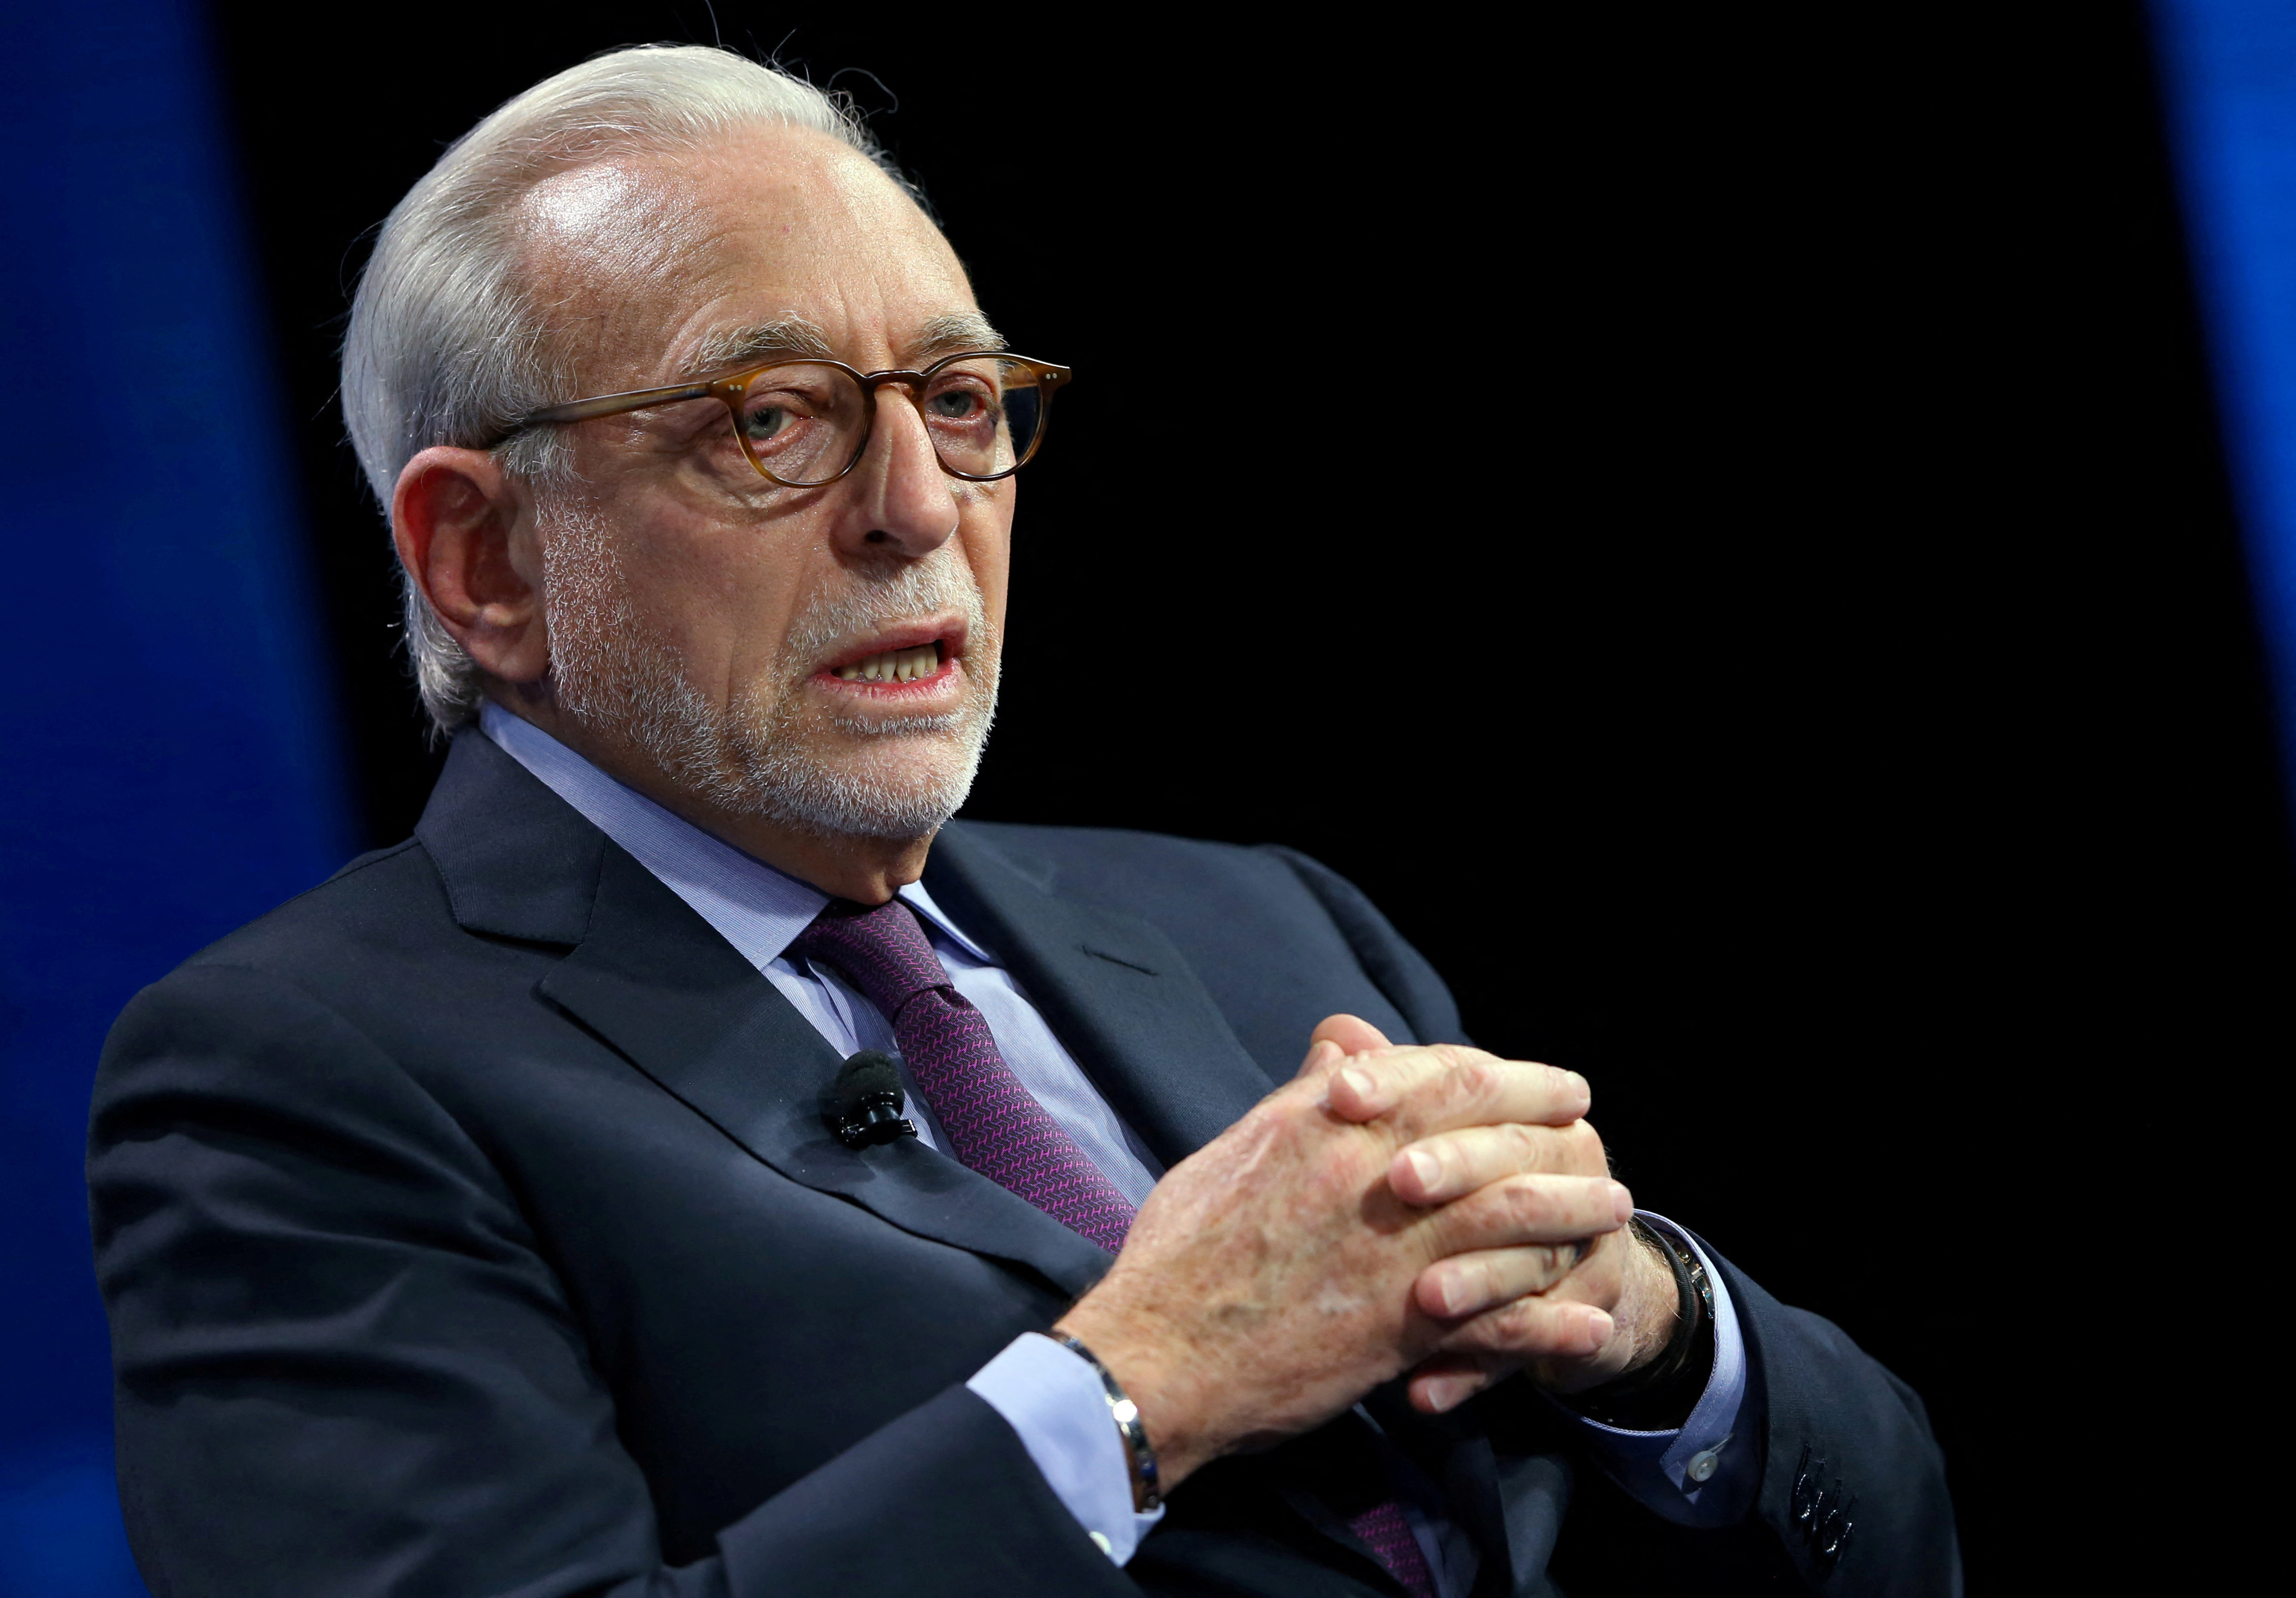 Disney CEO Bob Iger, Nelson Peltz enter final days of proxy fight — here’s what to know